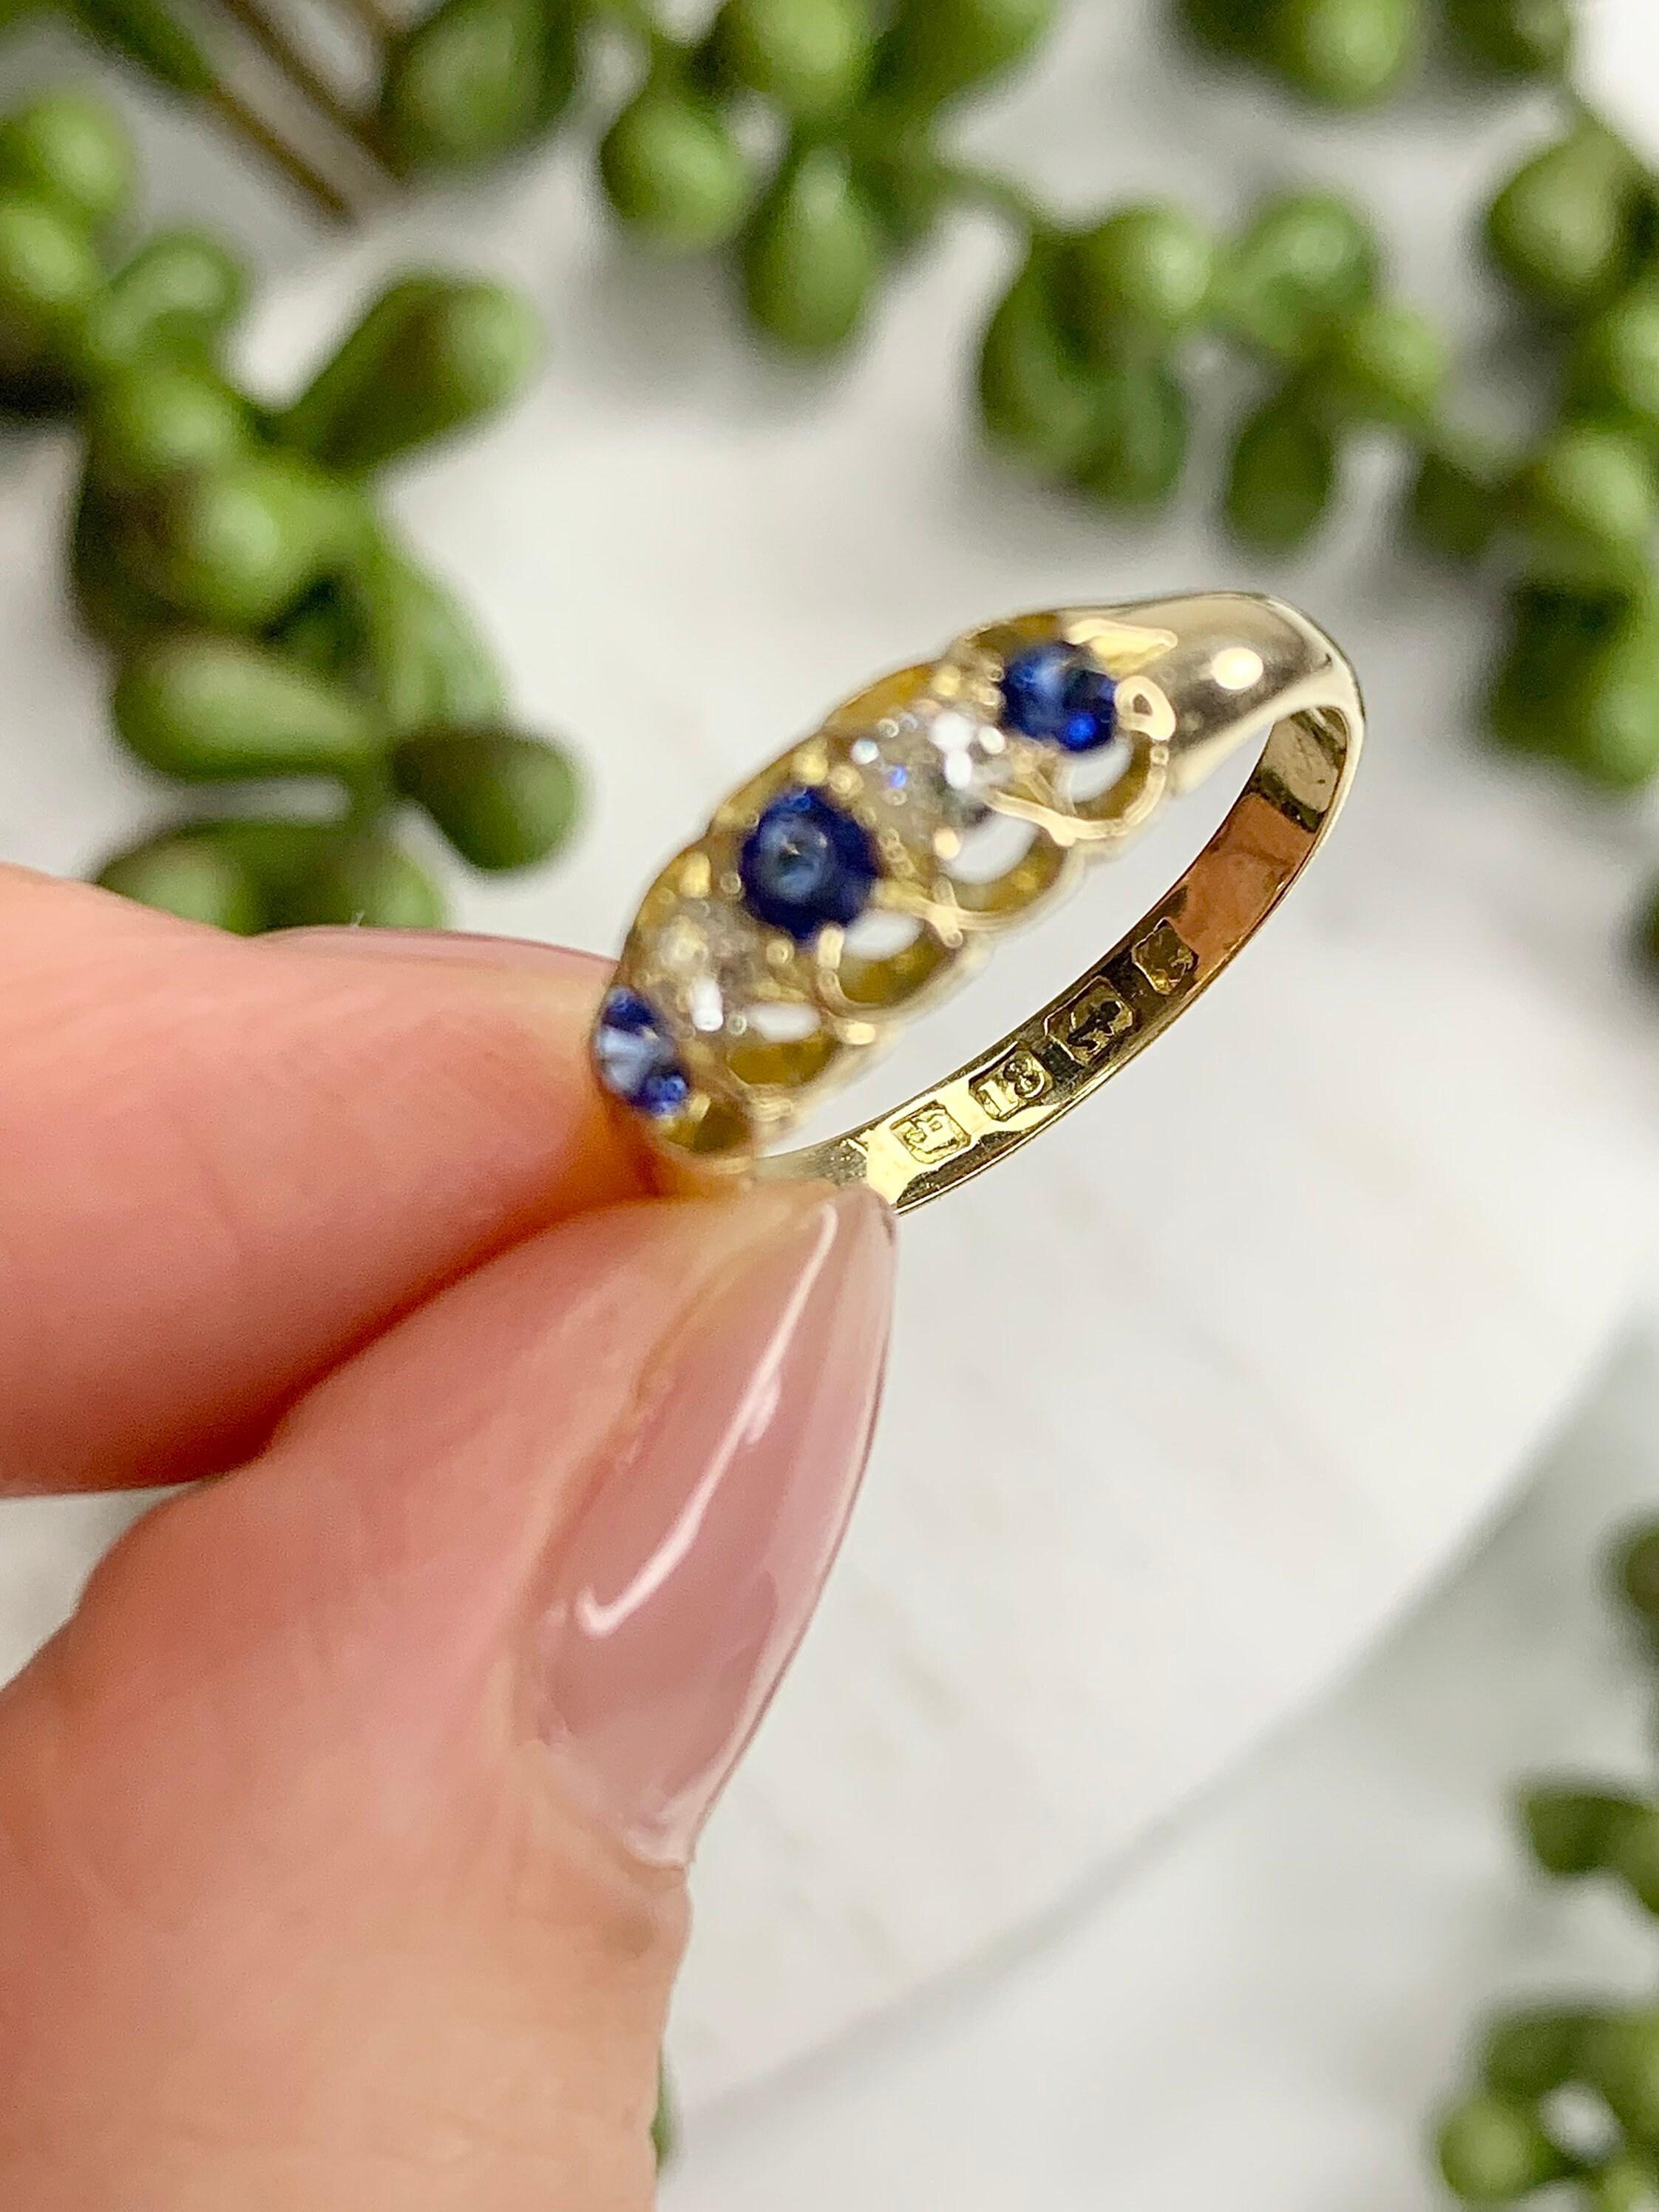 Sapphire & Diamond Gypsy Ring 

18ct Gold

Victorian 

Hallmarked Birmingham 1880

Beautiful Blue Sapphires & Old Cut Cut Diamonds 

UK Size K 1/2

US Size 5 3/4 

Can be resized using our resizing service,
please contact us for more